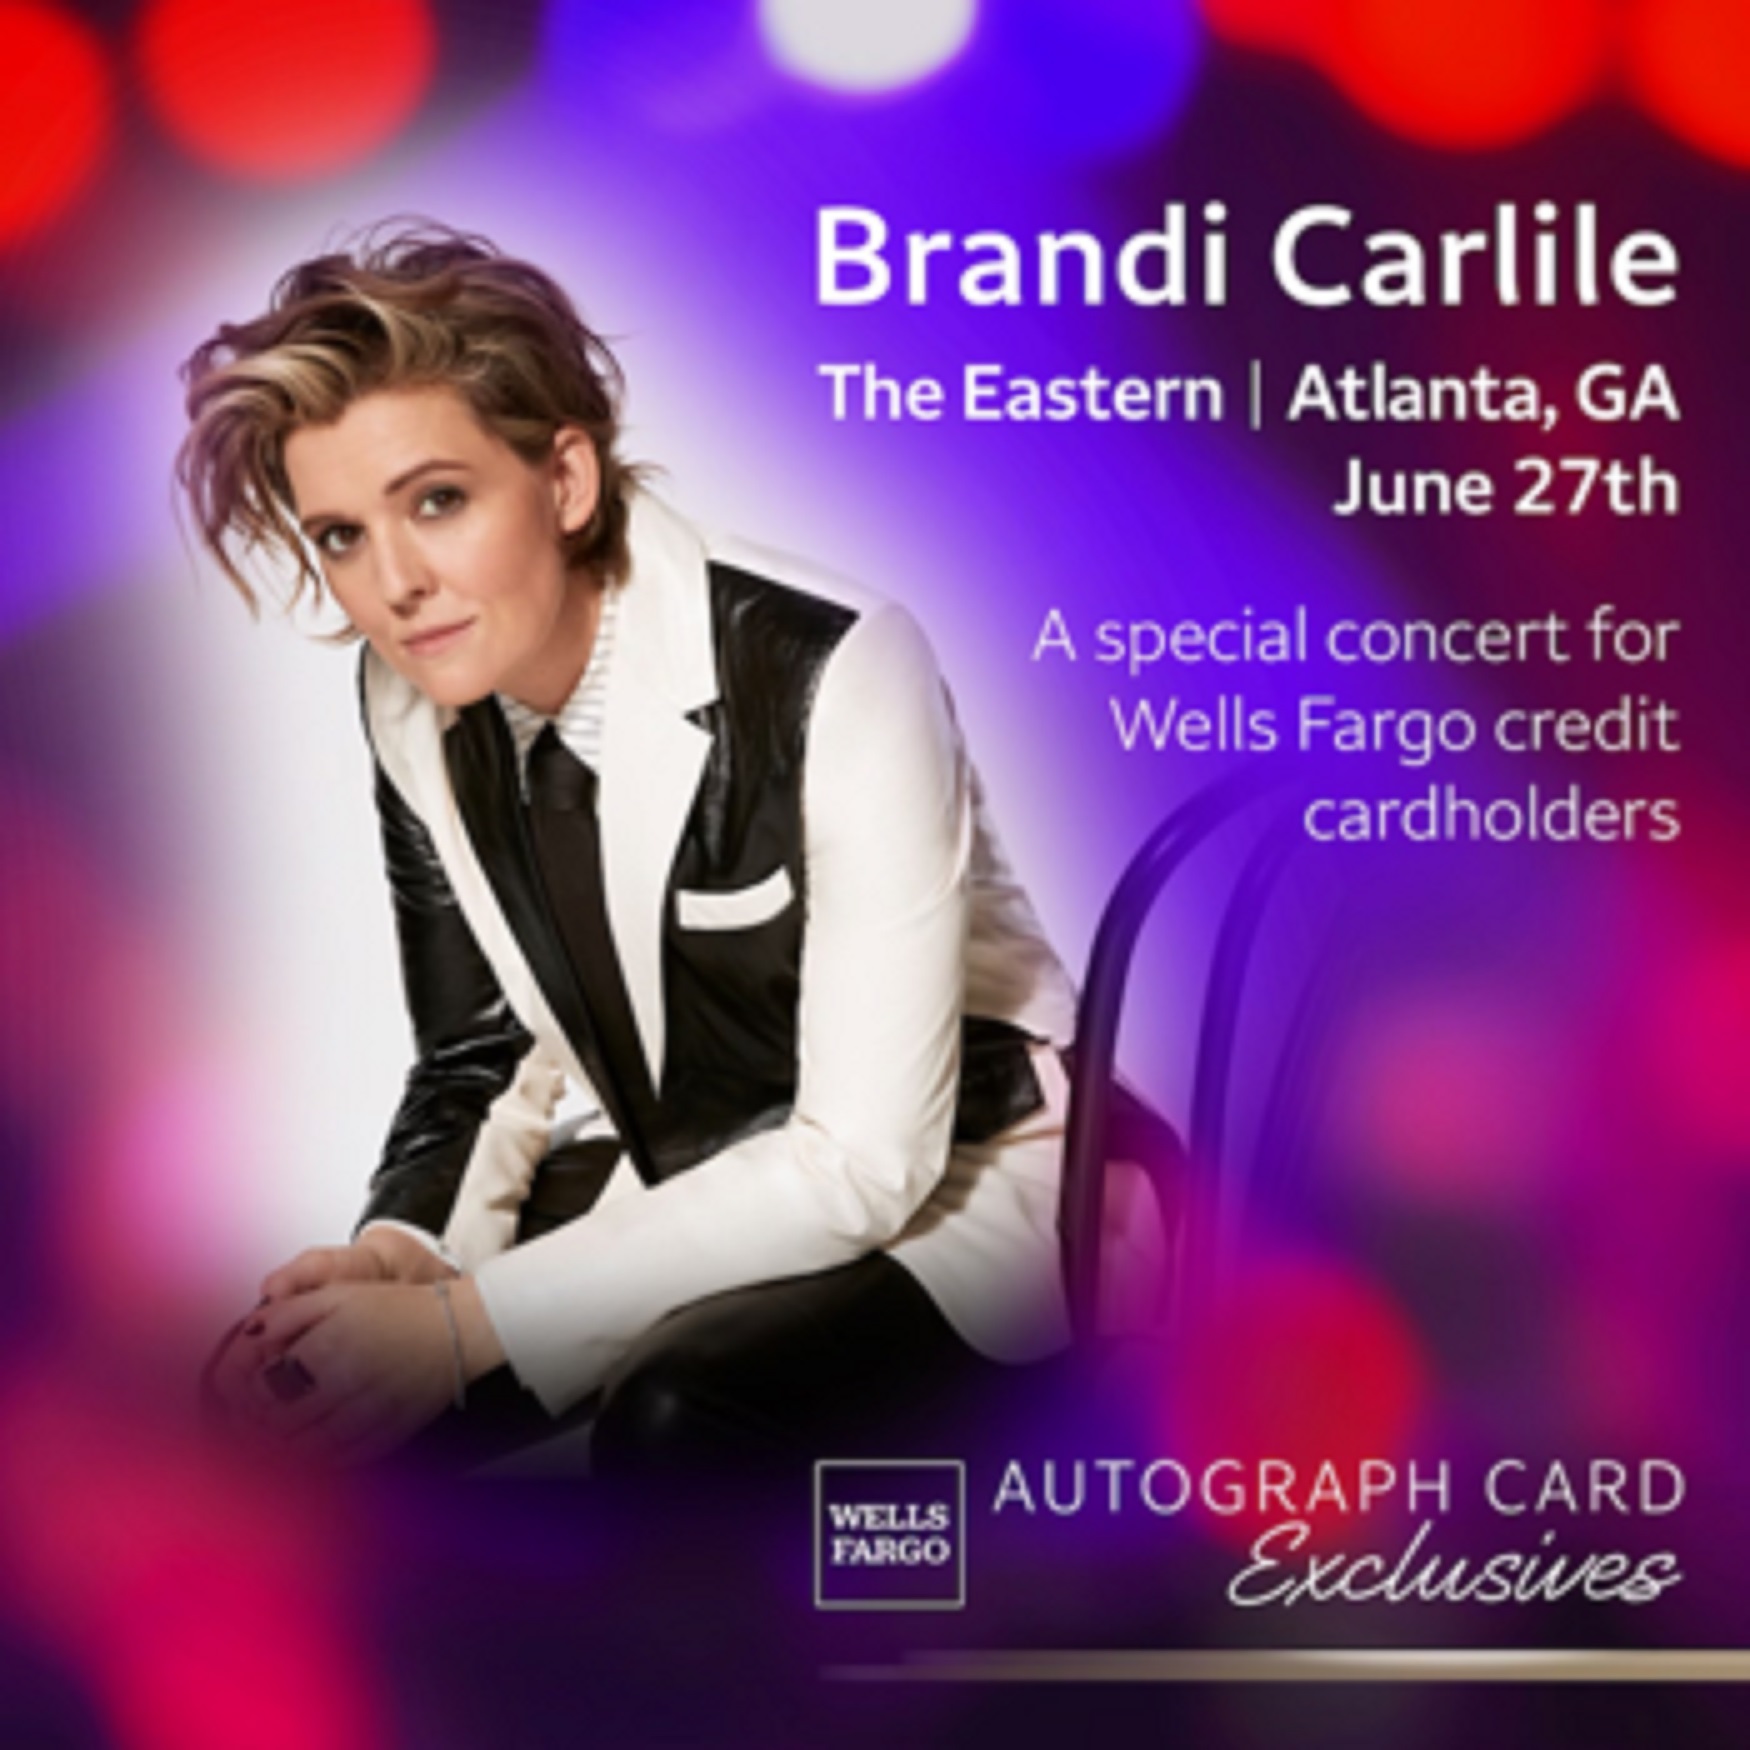 Brandi Carlile confirms special concert exclusively for Wells Fargo Autograph Credit card holders at Atlanta's The Eastern on June 27